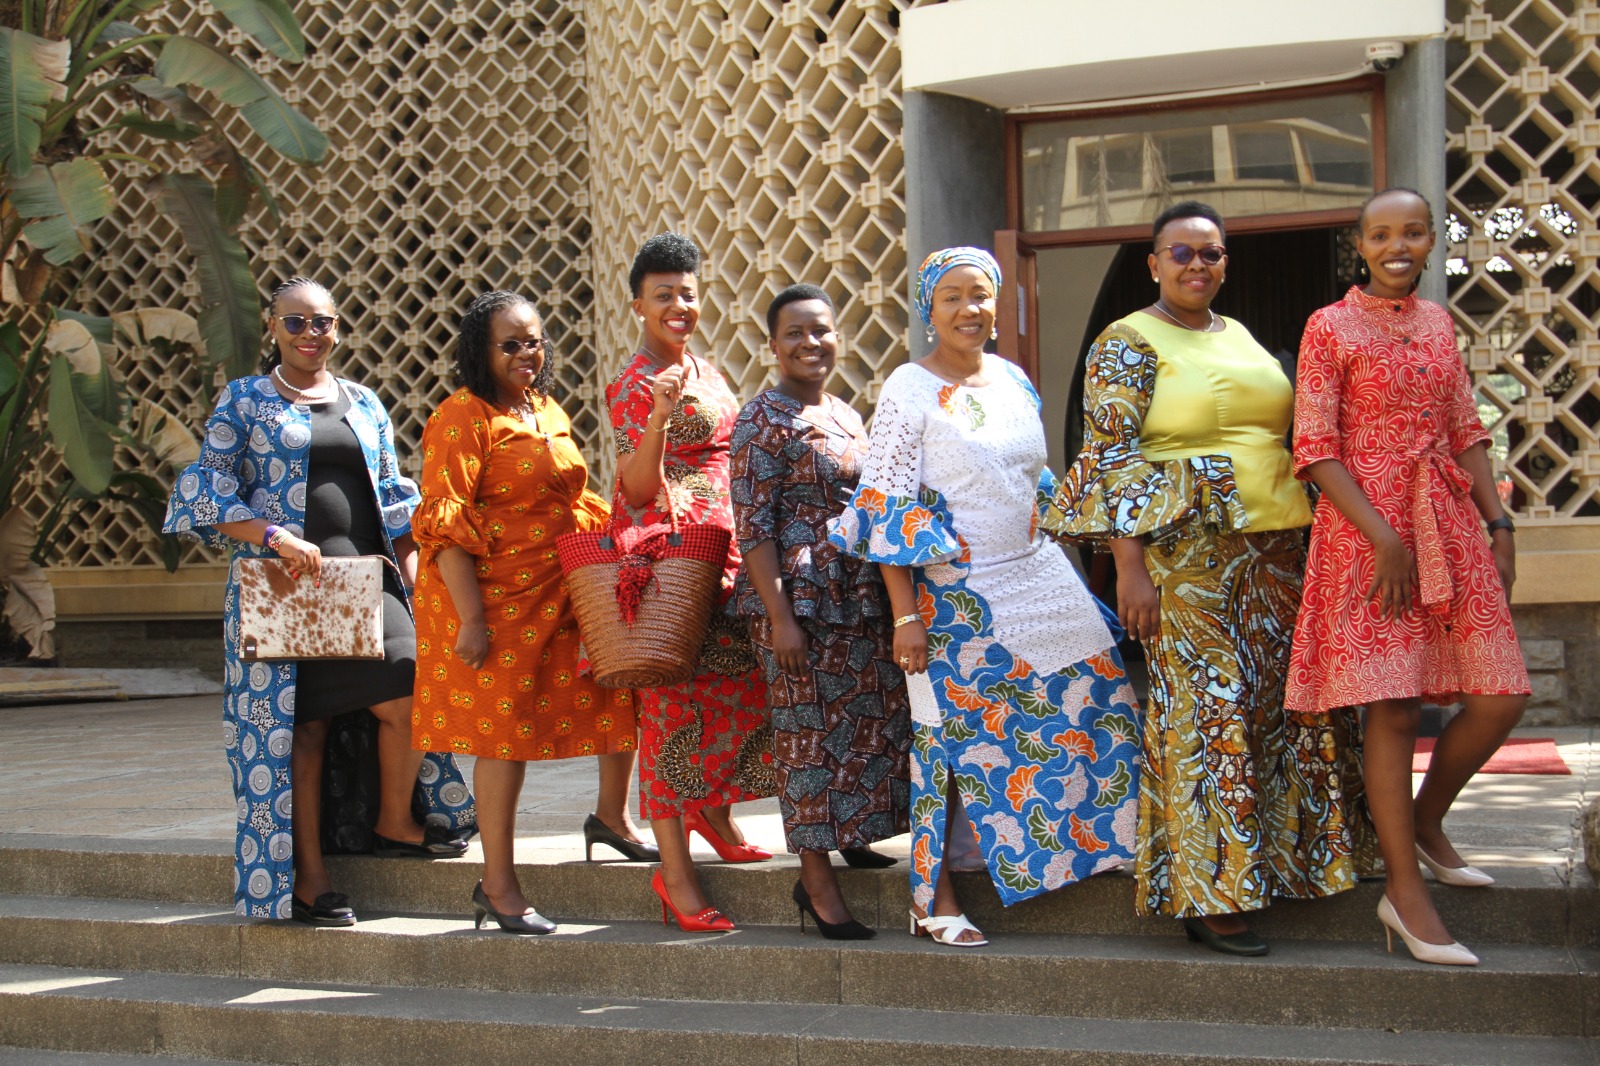 WOMEN PARLIAMENTARY DON LOCAL DESIGNERS' OUTFITS FOR A WEEK TO PROMOTE LOCAL INDUSTRIES  